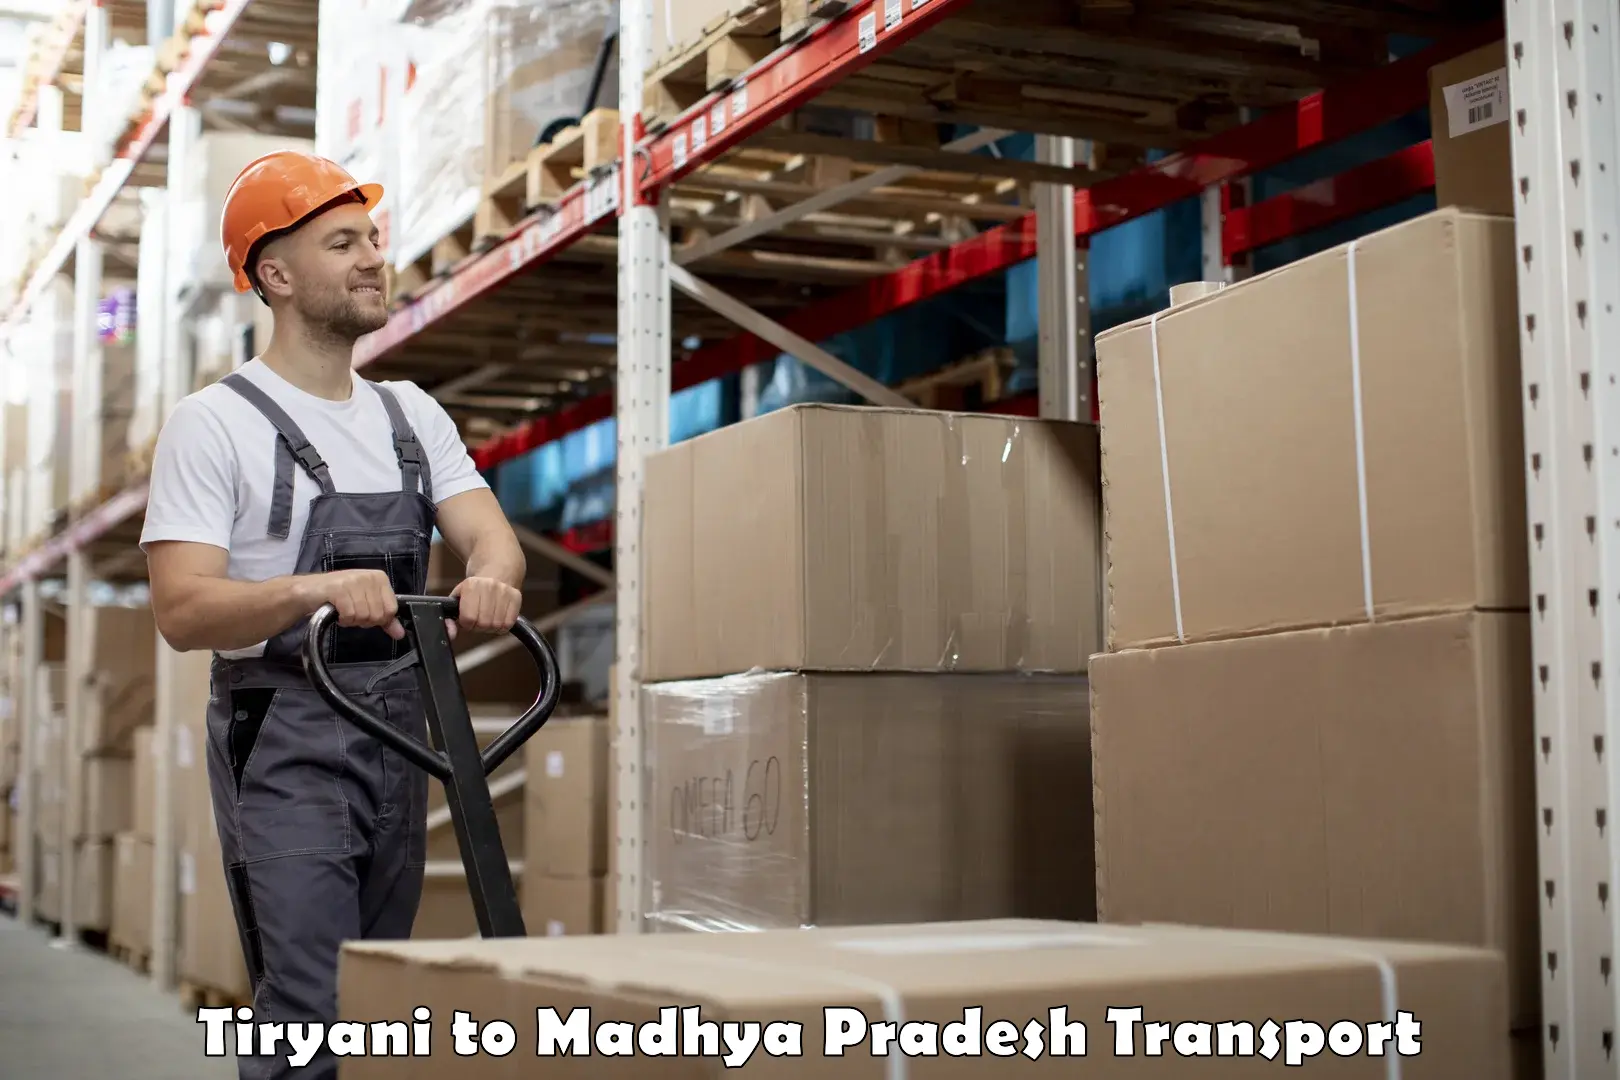 Delivery service Tiryani to Depalpur